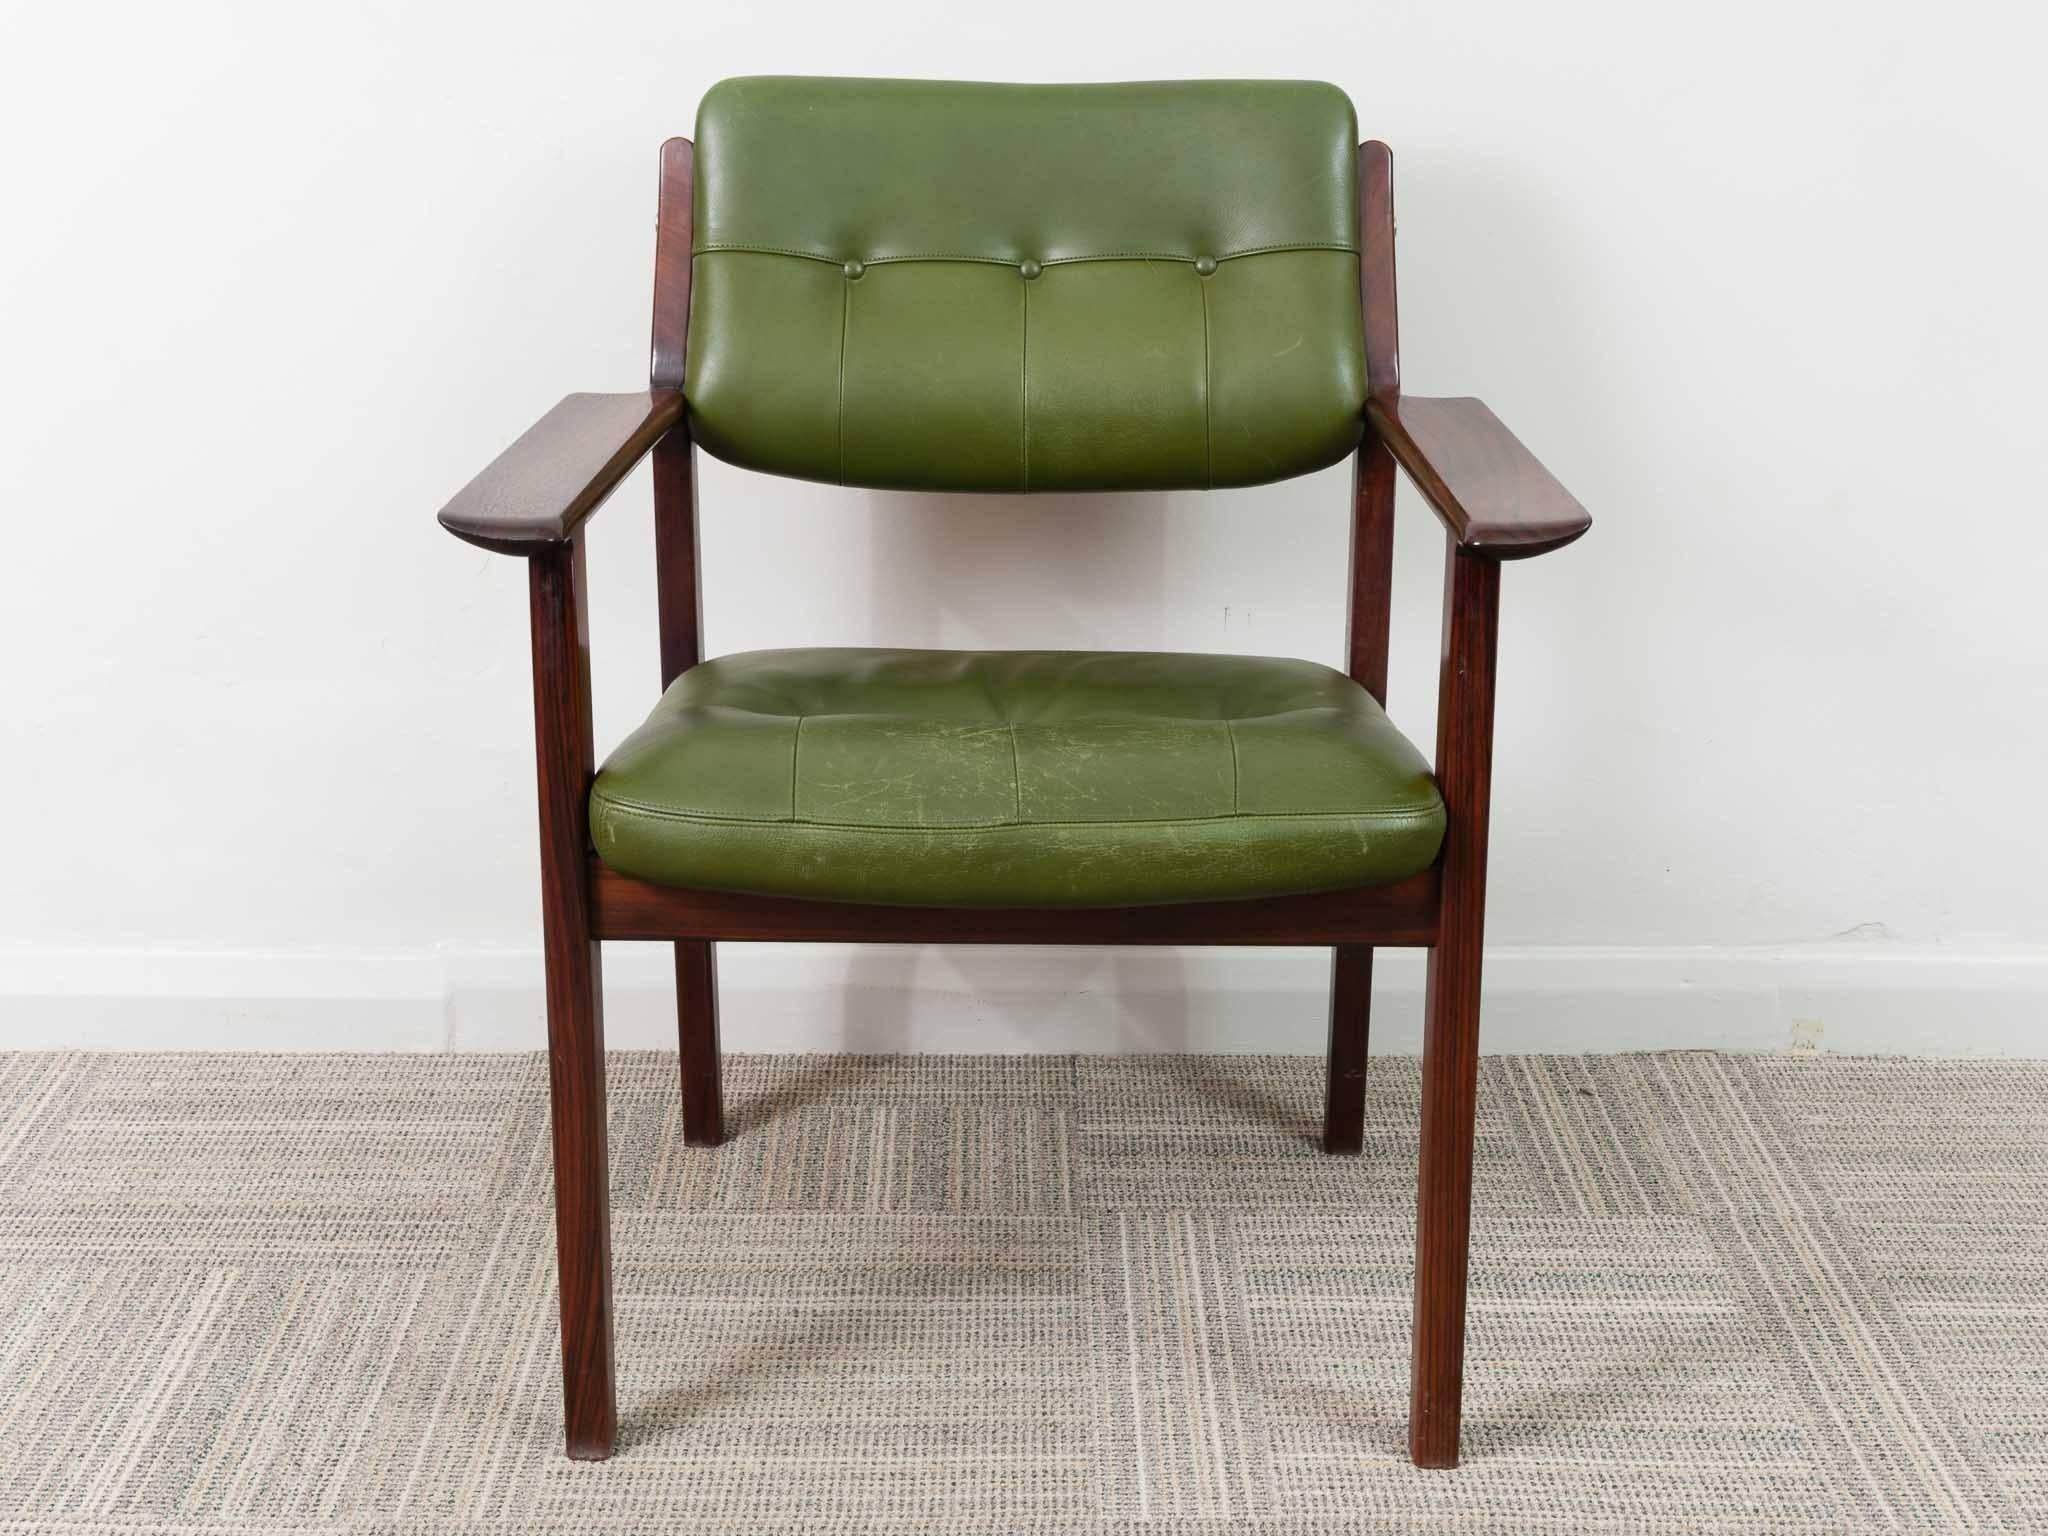 1960s set of six rosewood armchairs designed by Arne Vodder for Sibast Mobler. The chairs are made from solid rosewood and are all in excellent condition with some wear and tear to the original green leather upholstery which is understandable given